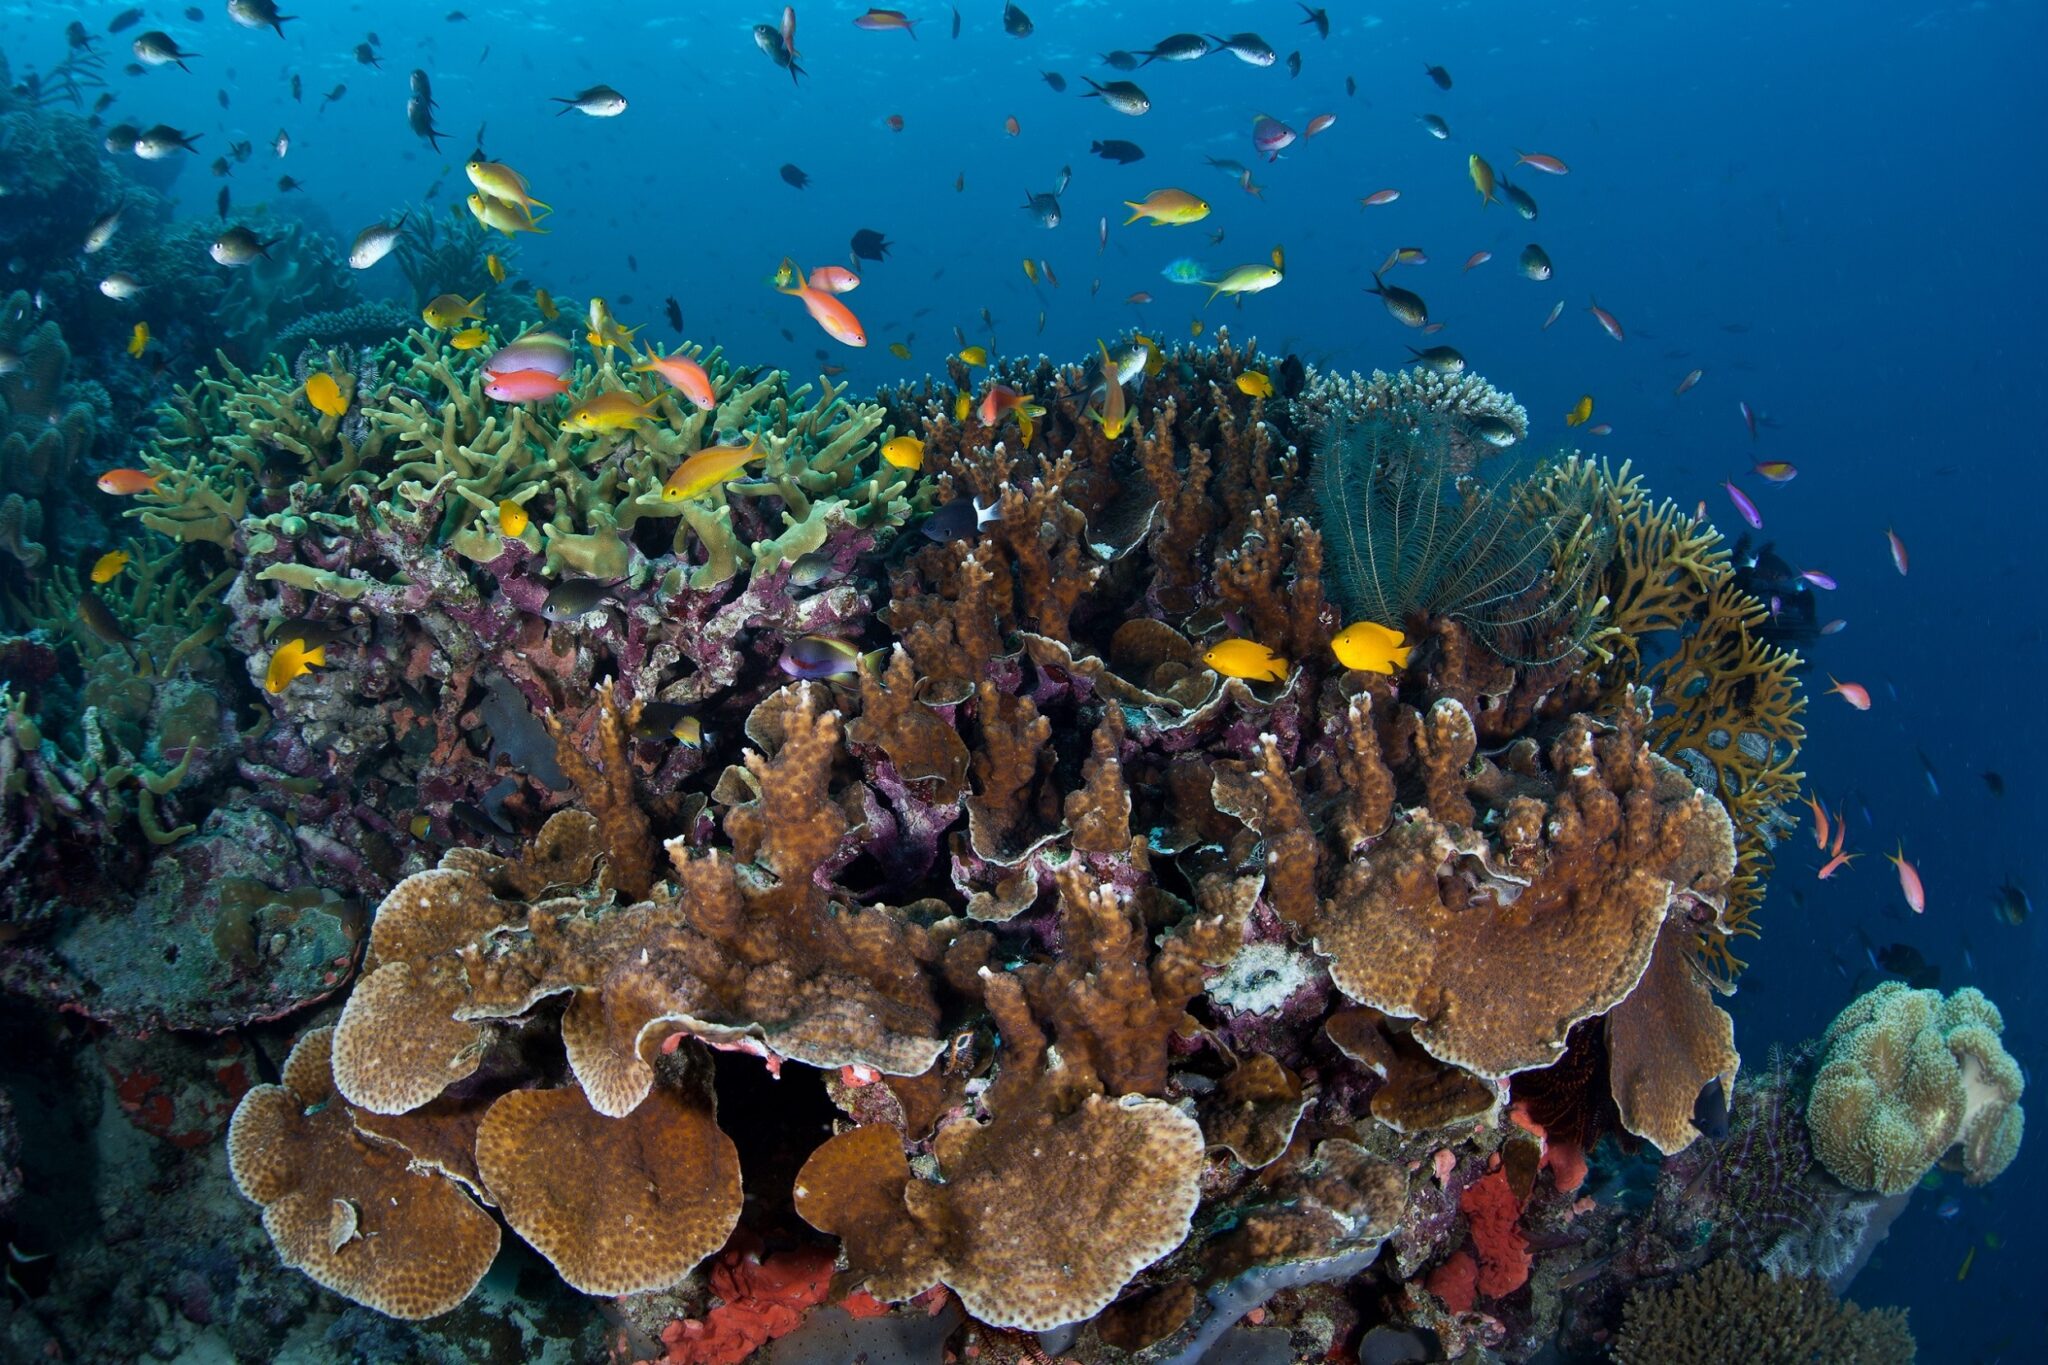 A colorful coral reef in the Solomon Islands, one of the best destinations for diving in the month of August